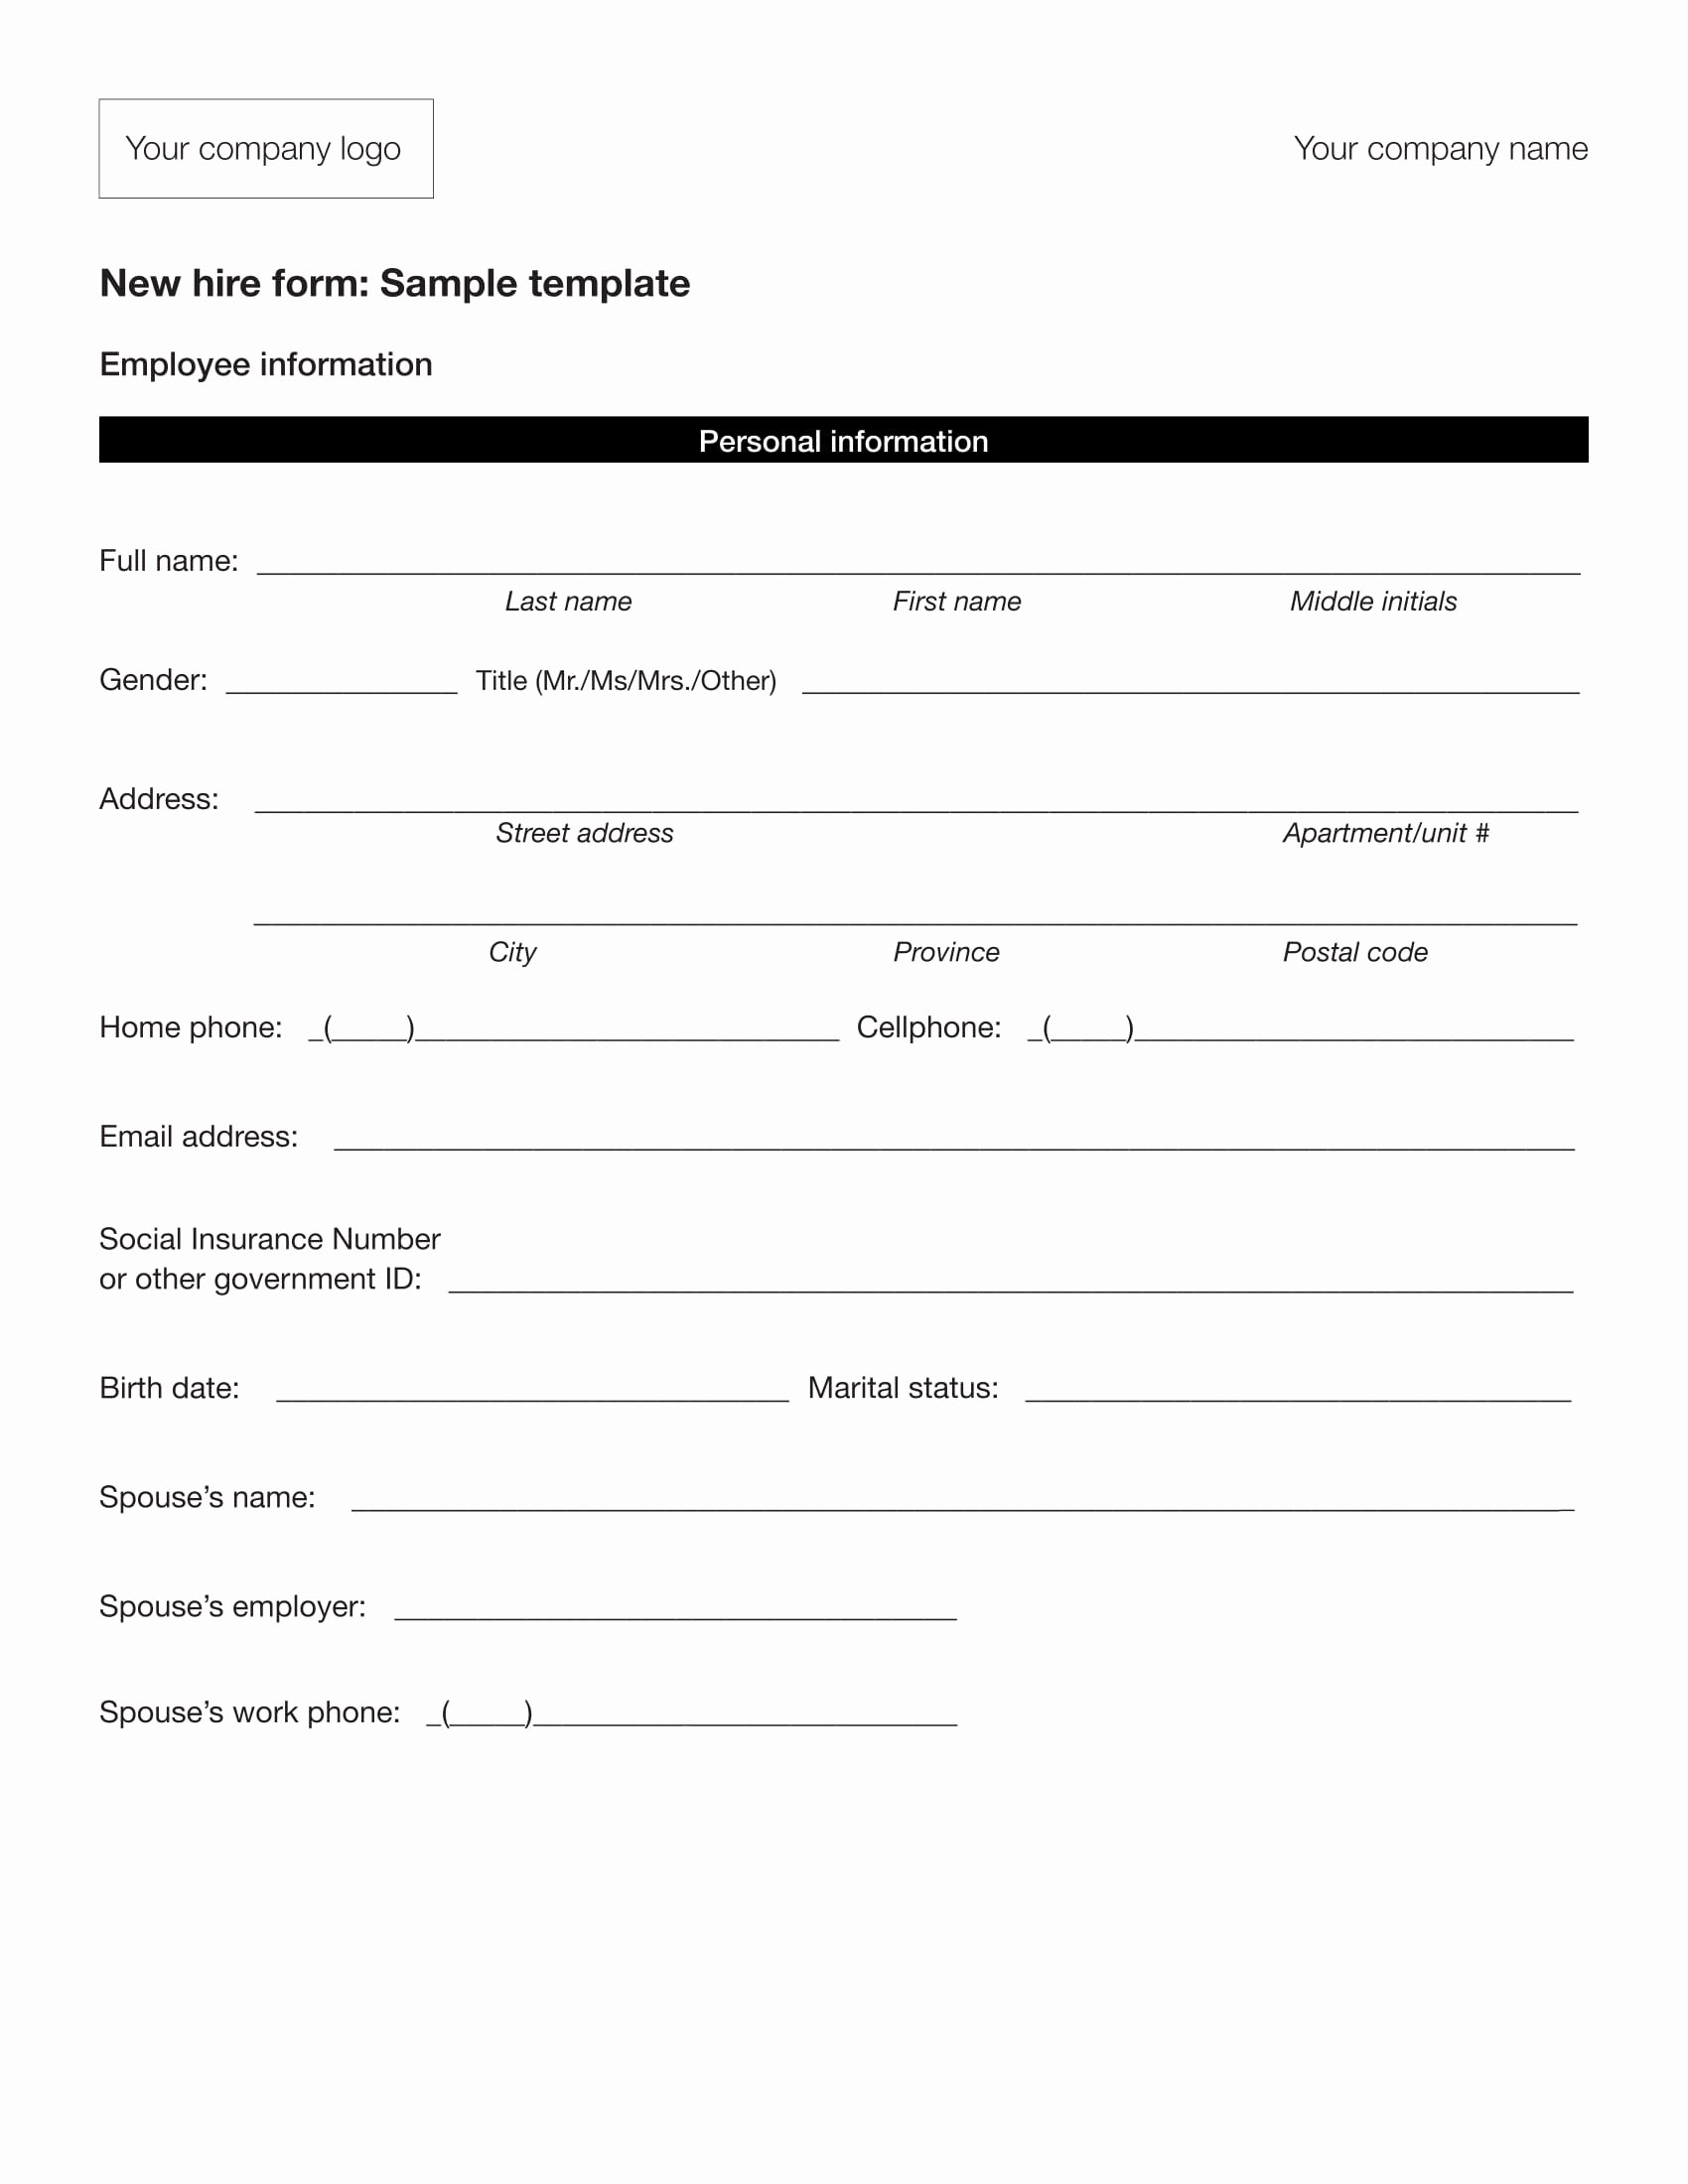 New Hire Requisition form Awesome 13 Employee Information forms Free Word Pdf format